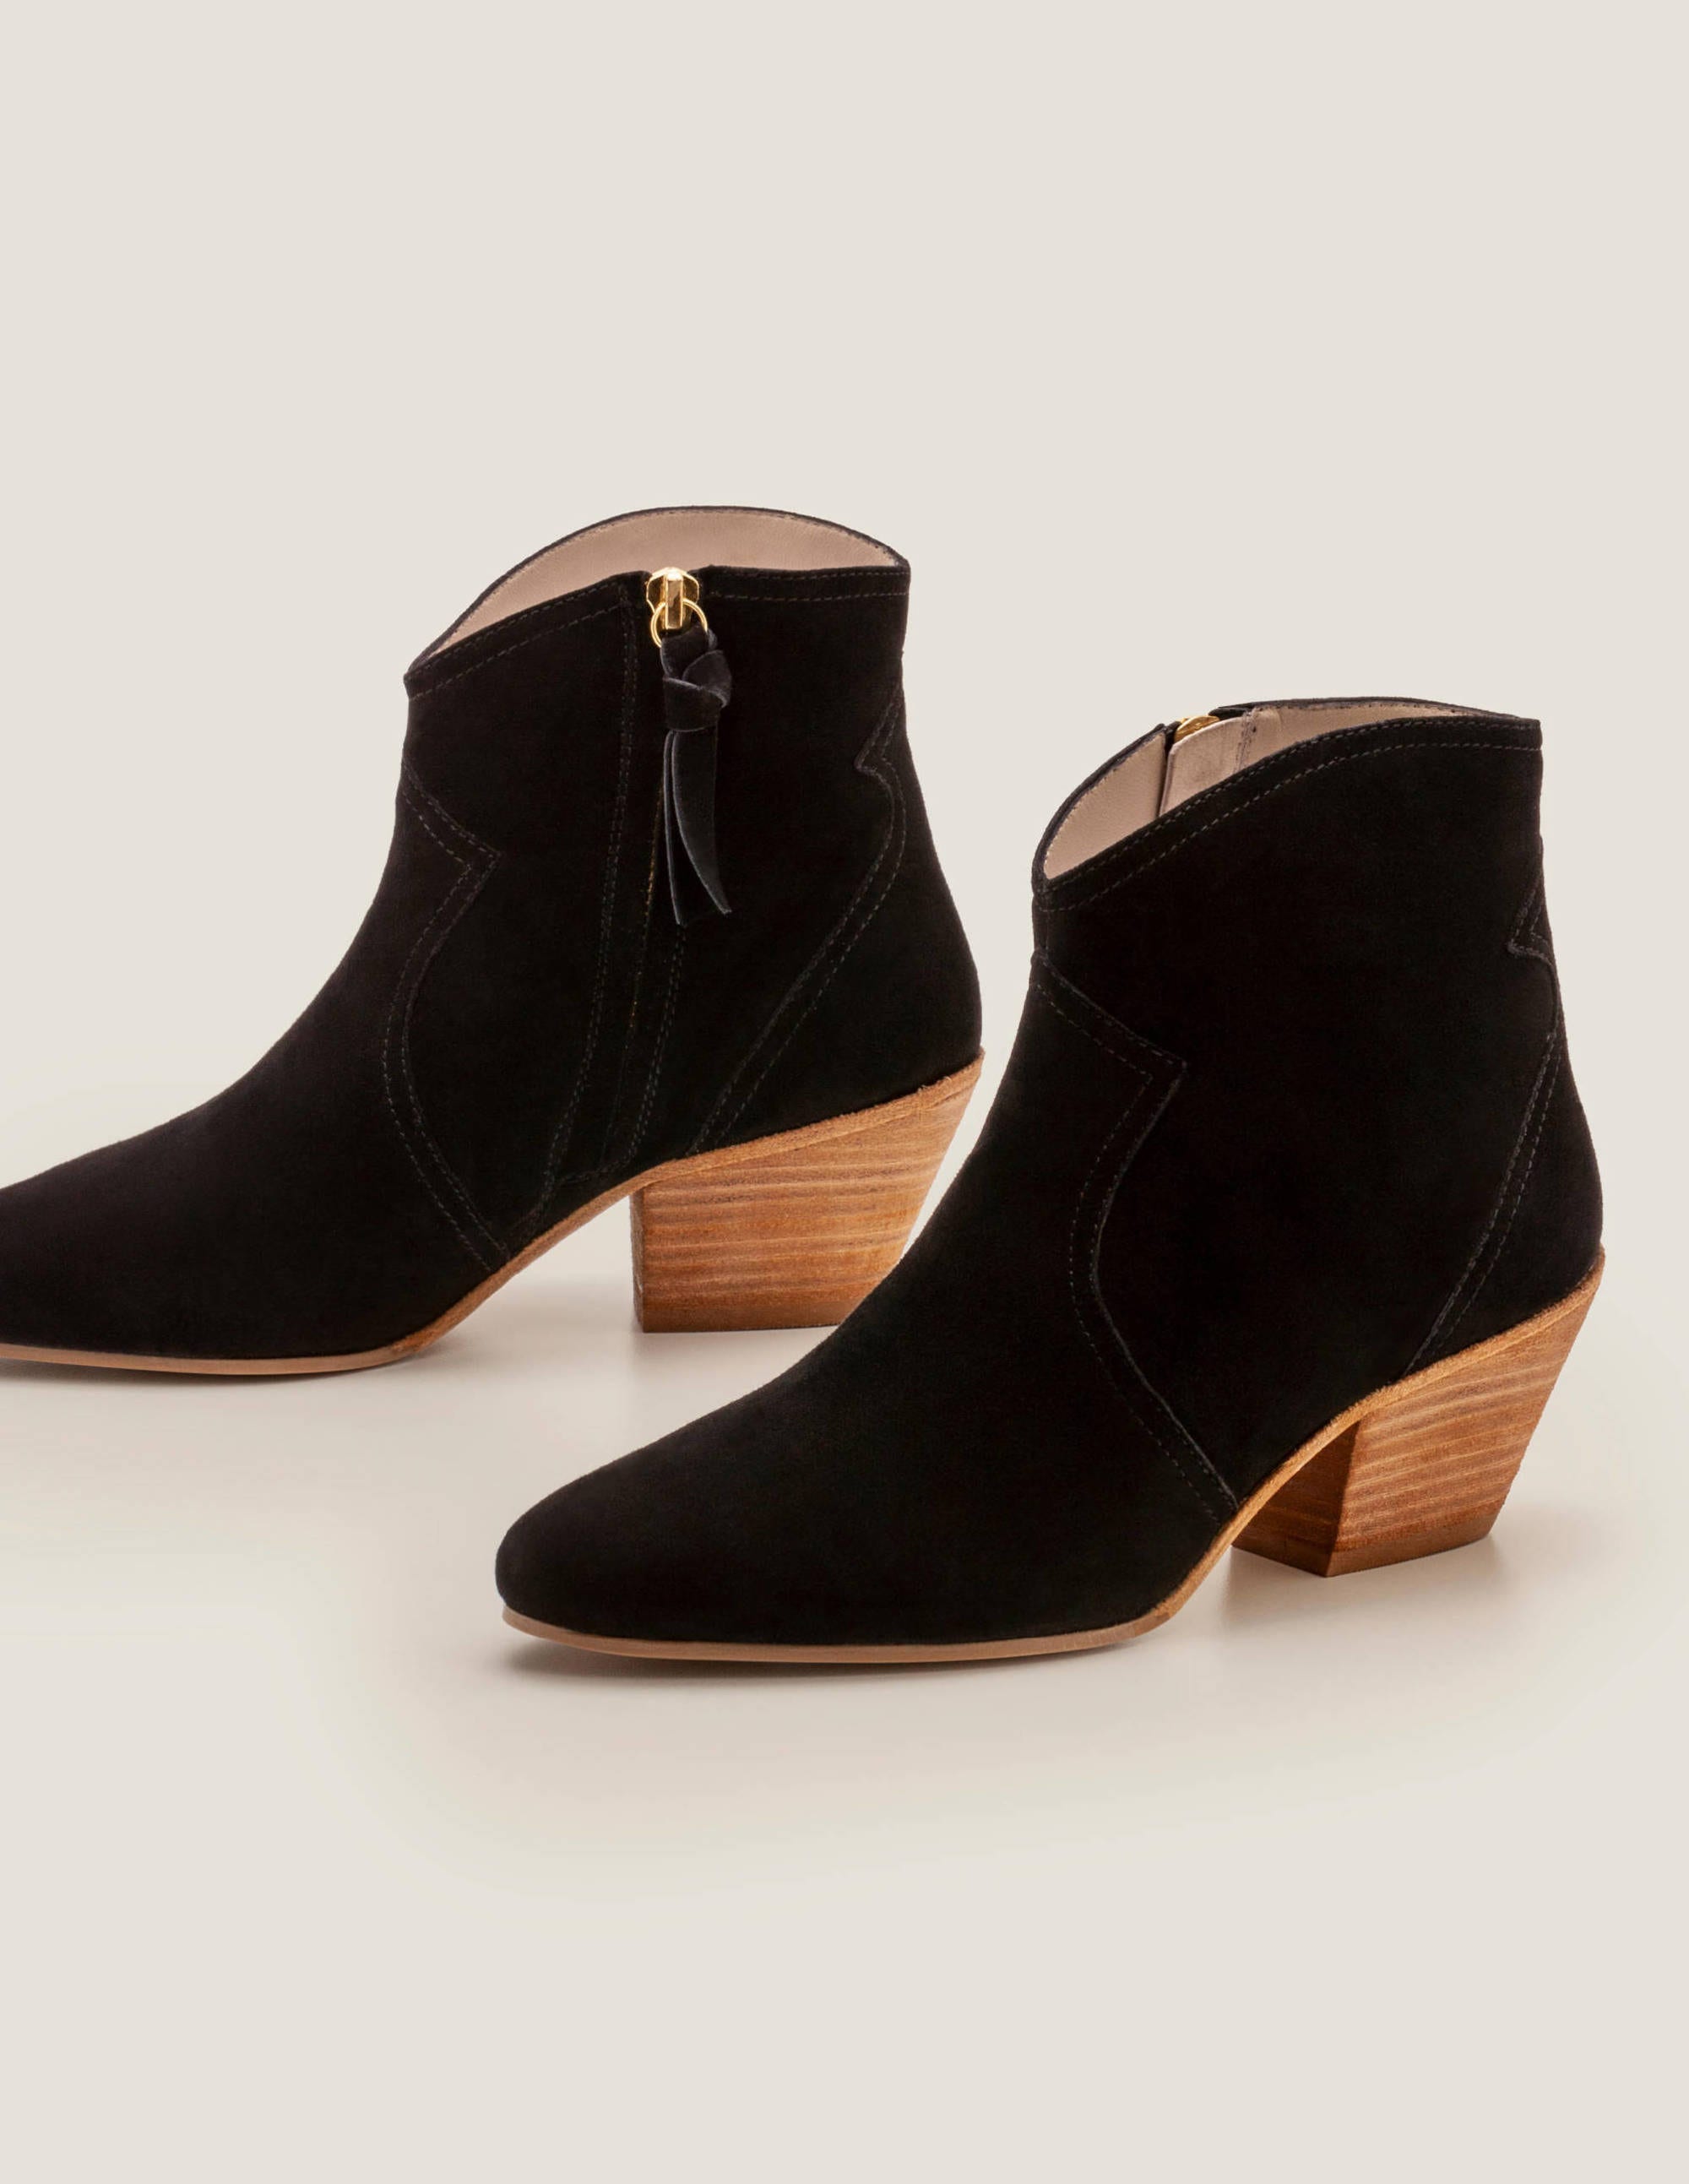 Northumbria Ankle Boots - Black | Boden US